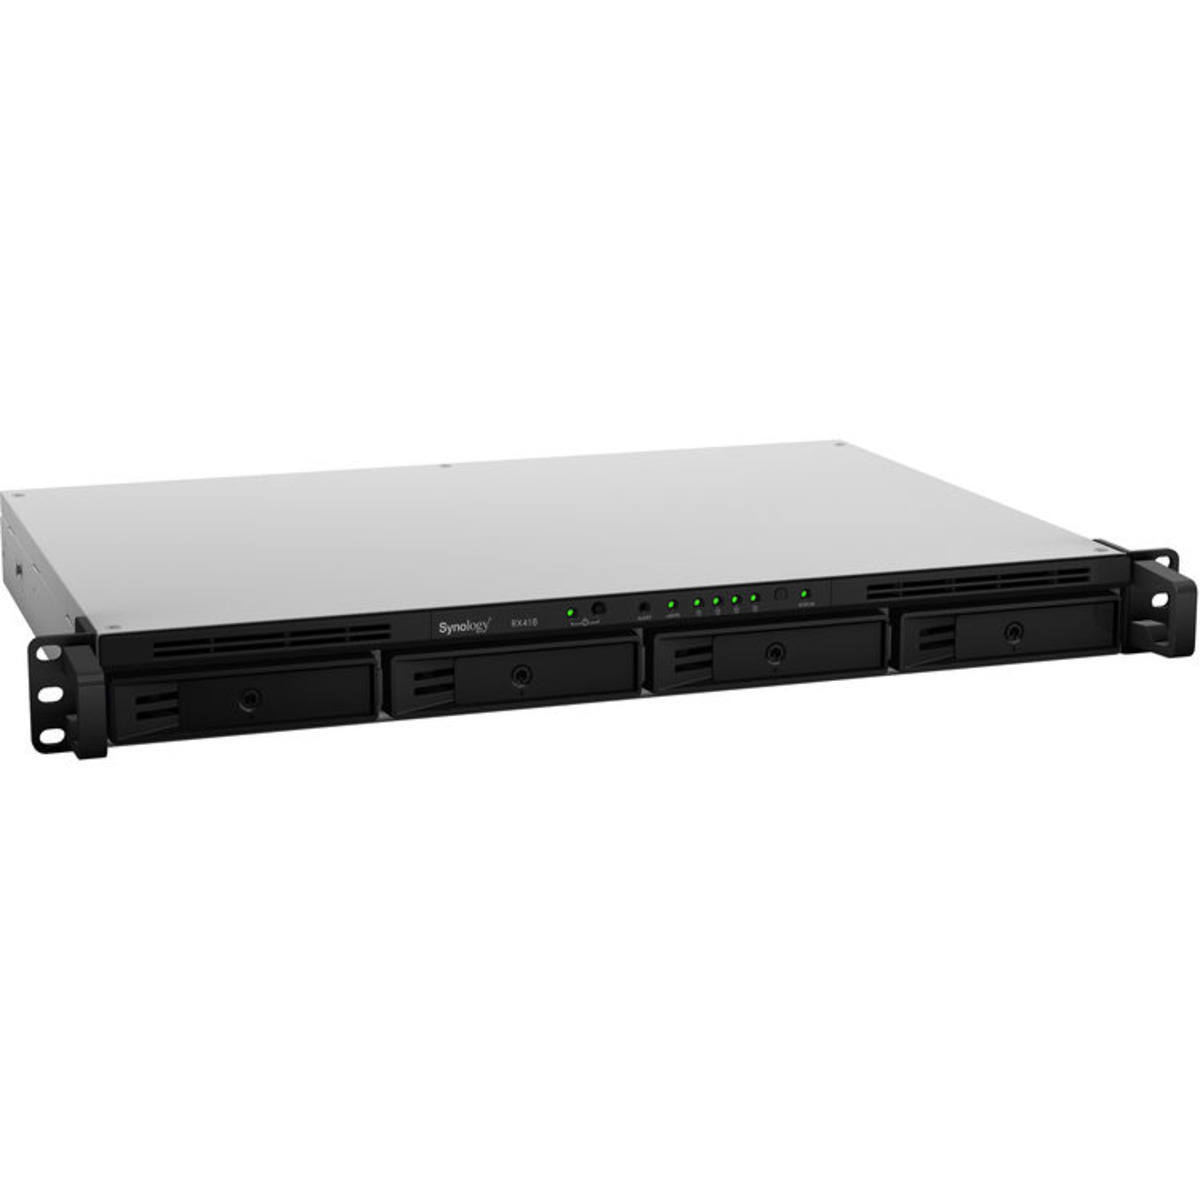 Synology RX418 External Expansion Drive 16tb 4-Bay RackMount Multimedia / Power User / Business Expansion Enclosure 4x4tb Samsung 870 EVO MZ-77E4T0BAM 2.5 560/530MB/s SATA 6Gb/s SSD CONSUMER Class Drives Installed - Burn-In Tested - ON SALE RX418 External Expansion Drive